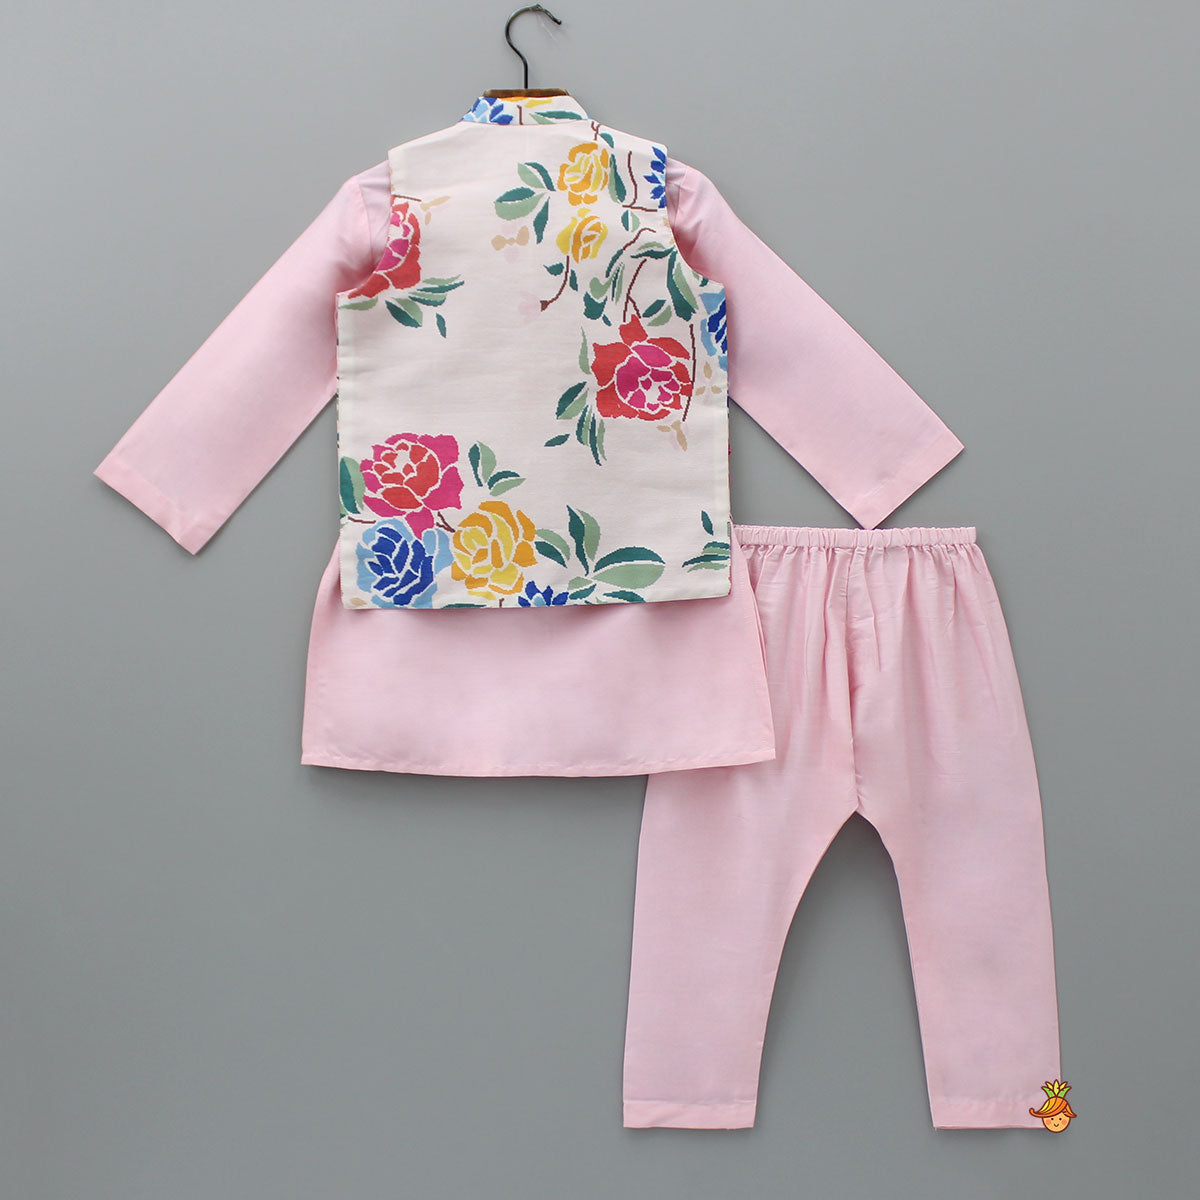 Pink Kurta With Hand Embroidered Floral Printed Jacket And Pyjama